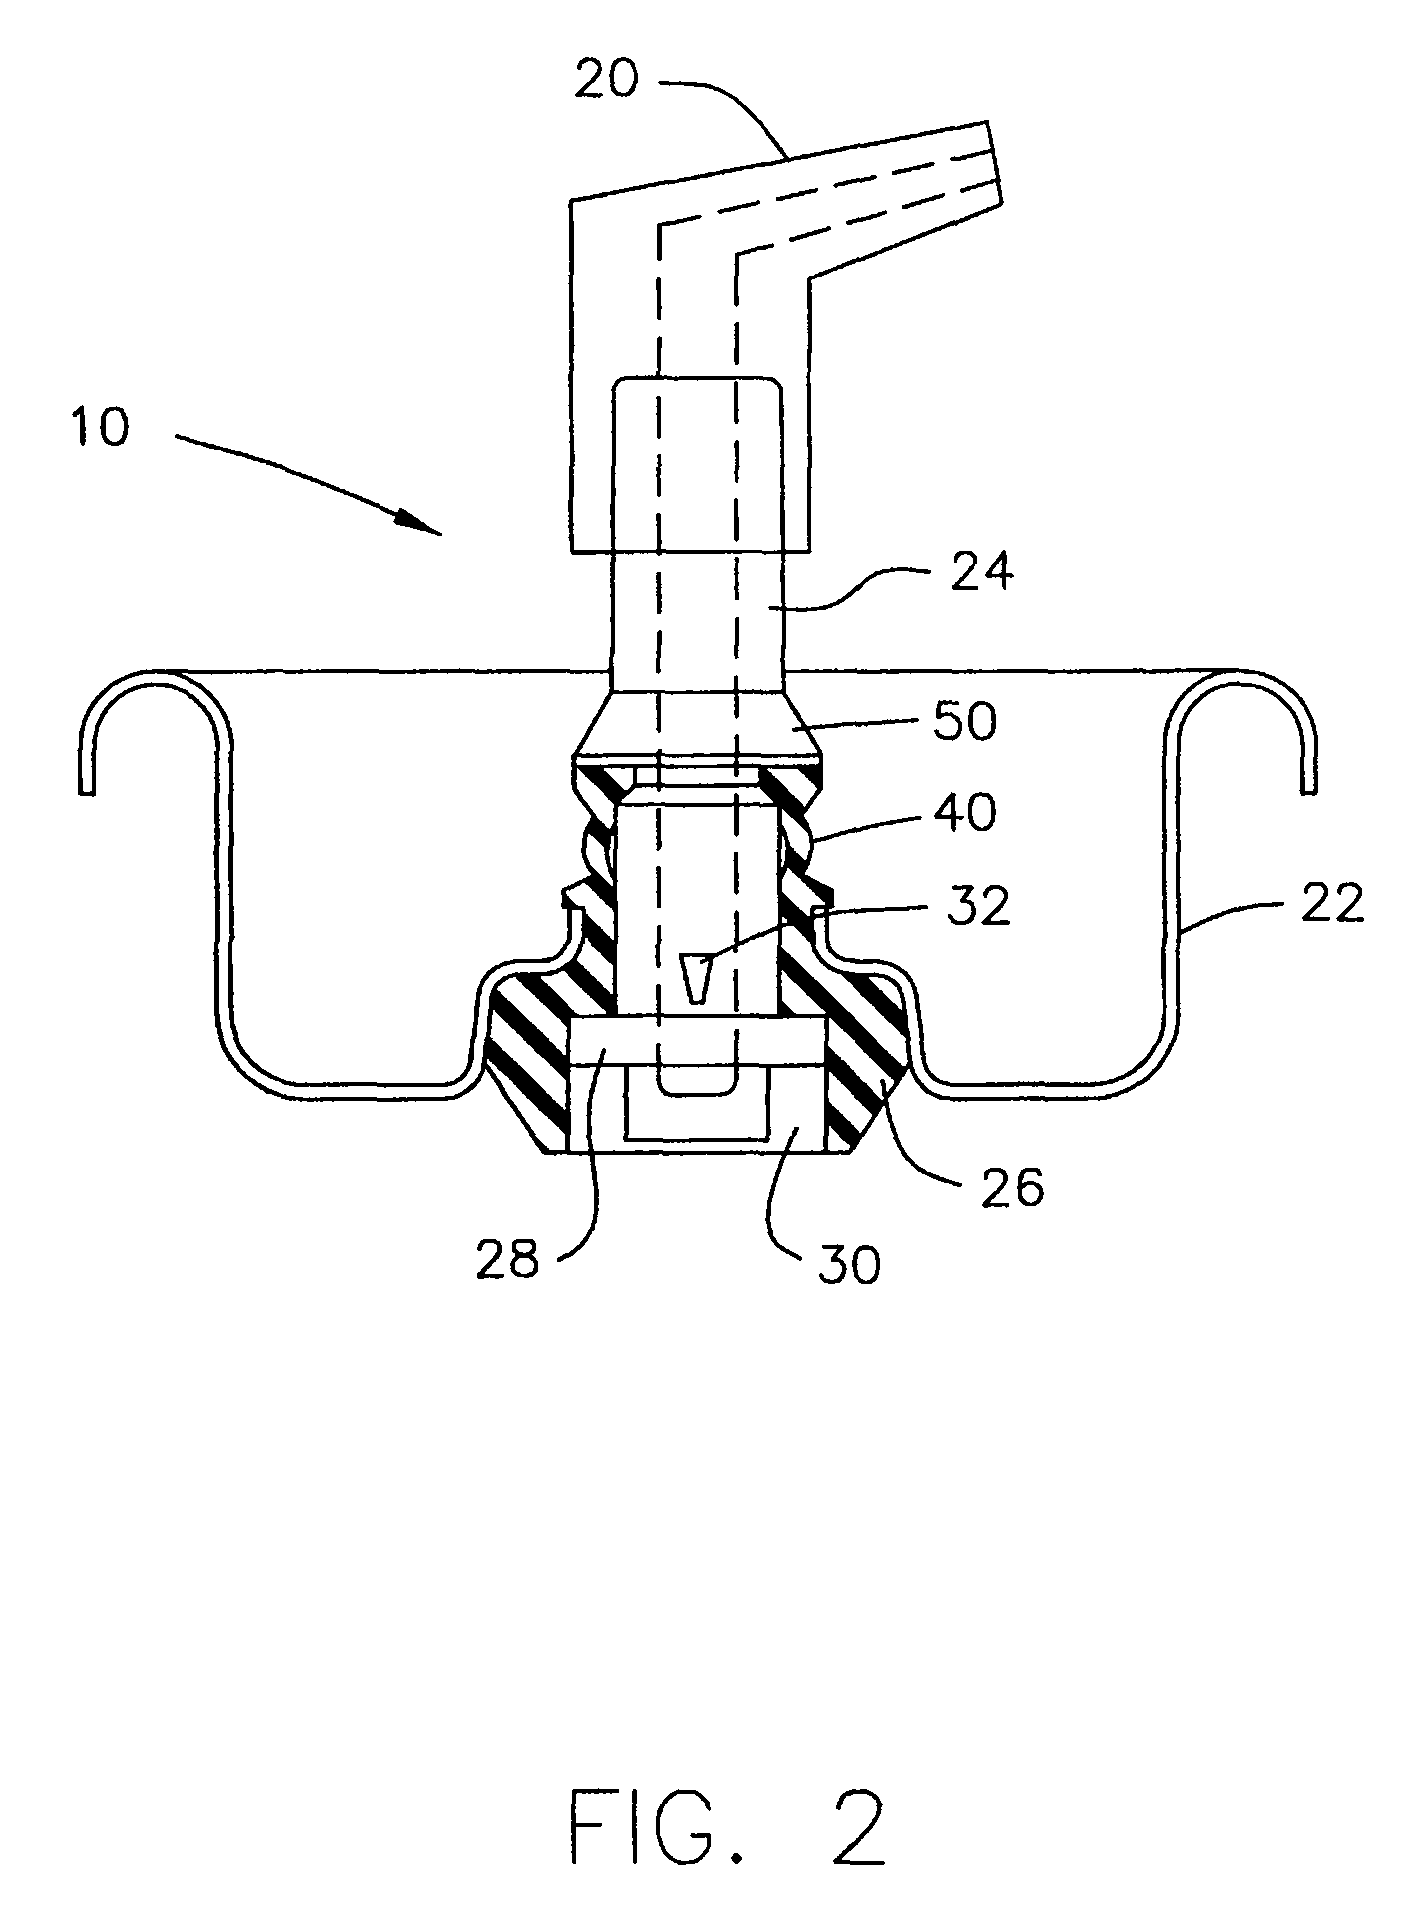 Valve for use in a container which employs pressure to dispense product